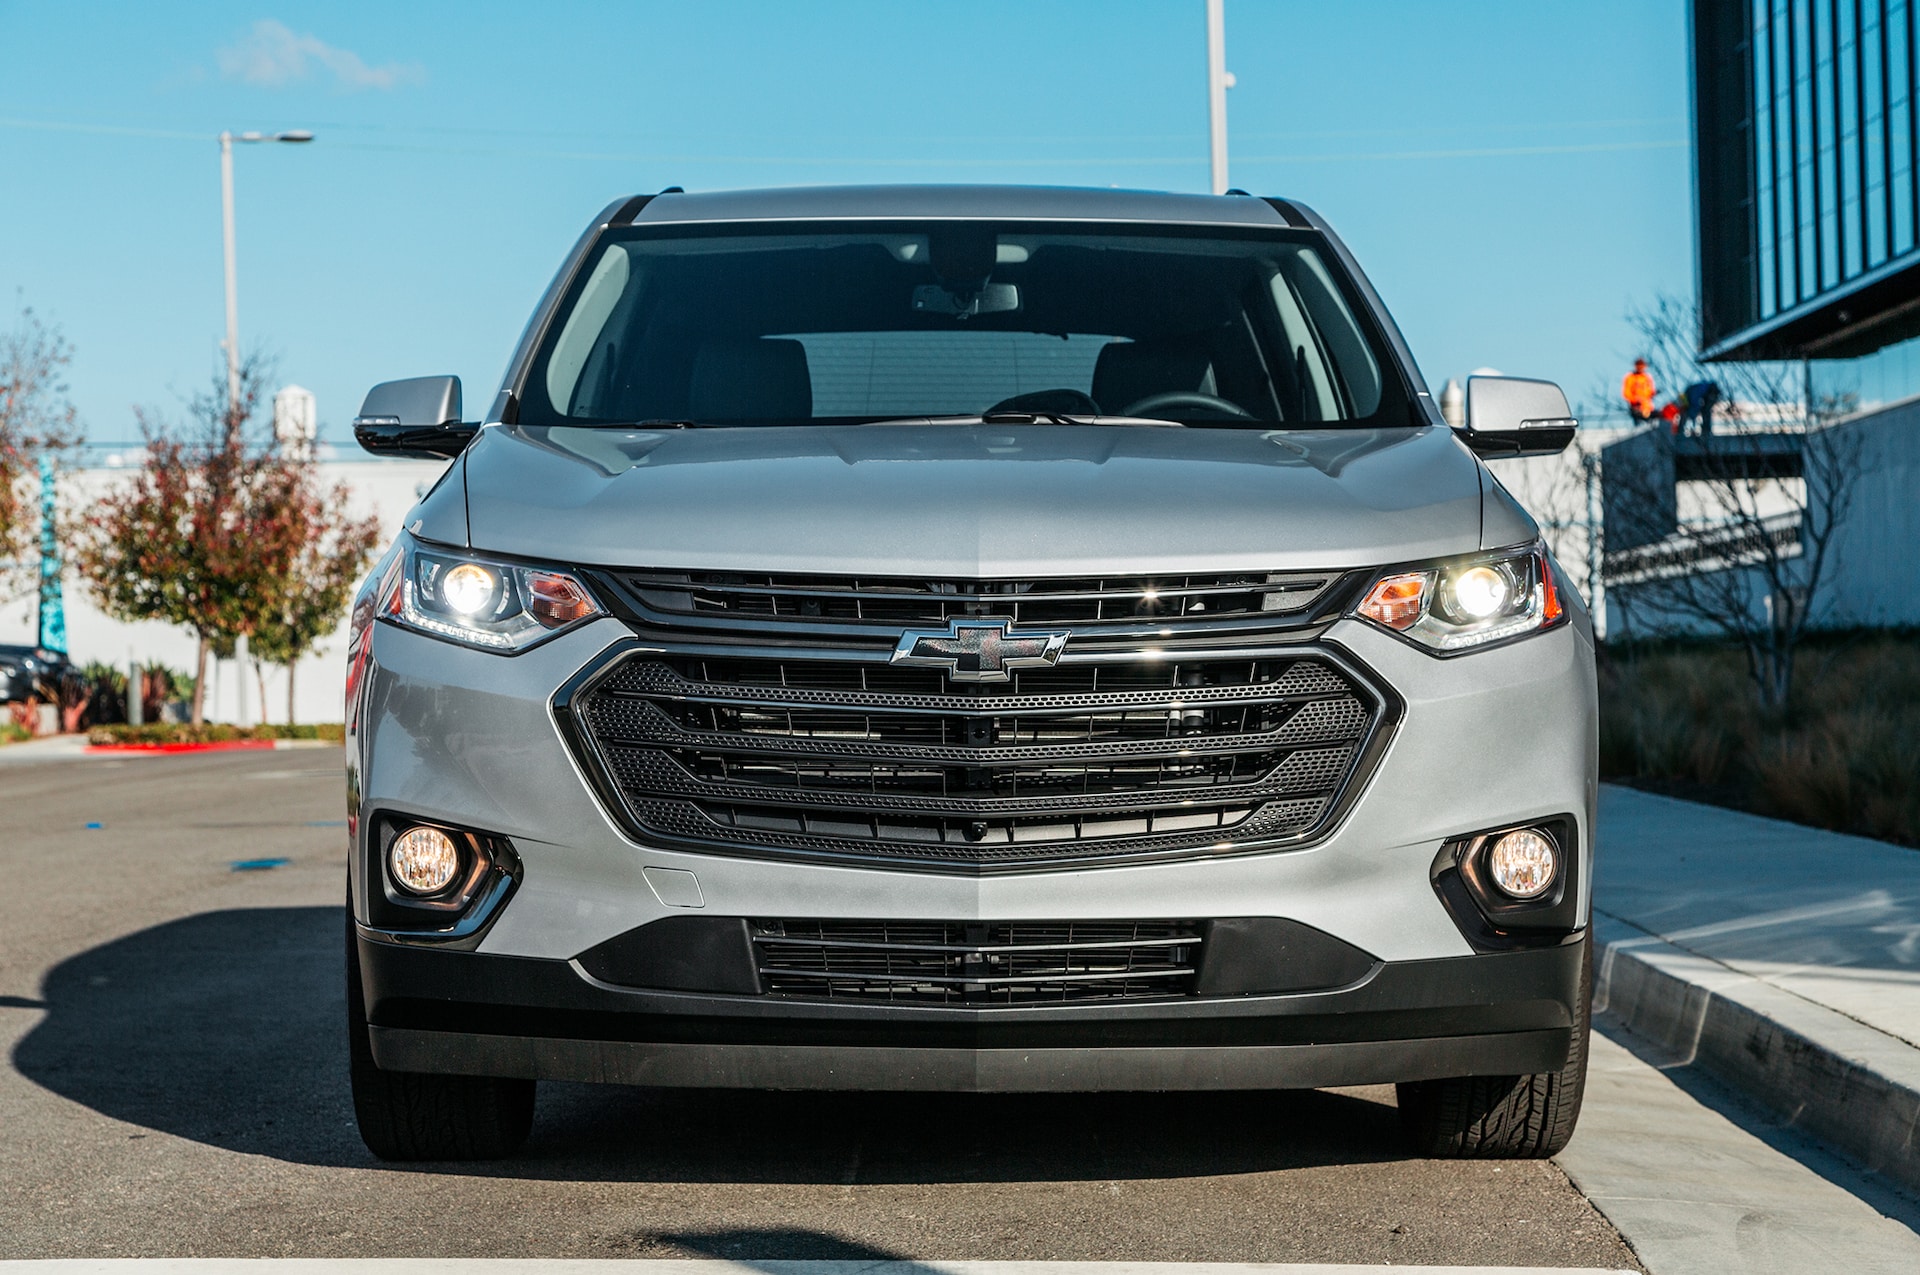 2018 Chevrolet Traverse Interior Review: Better Quality, Useful Tech